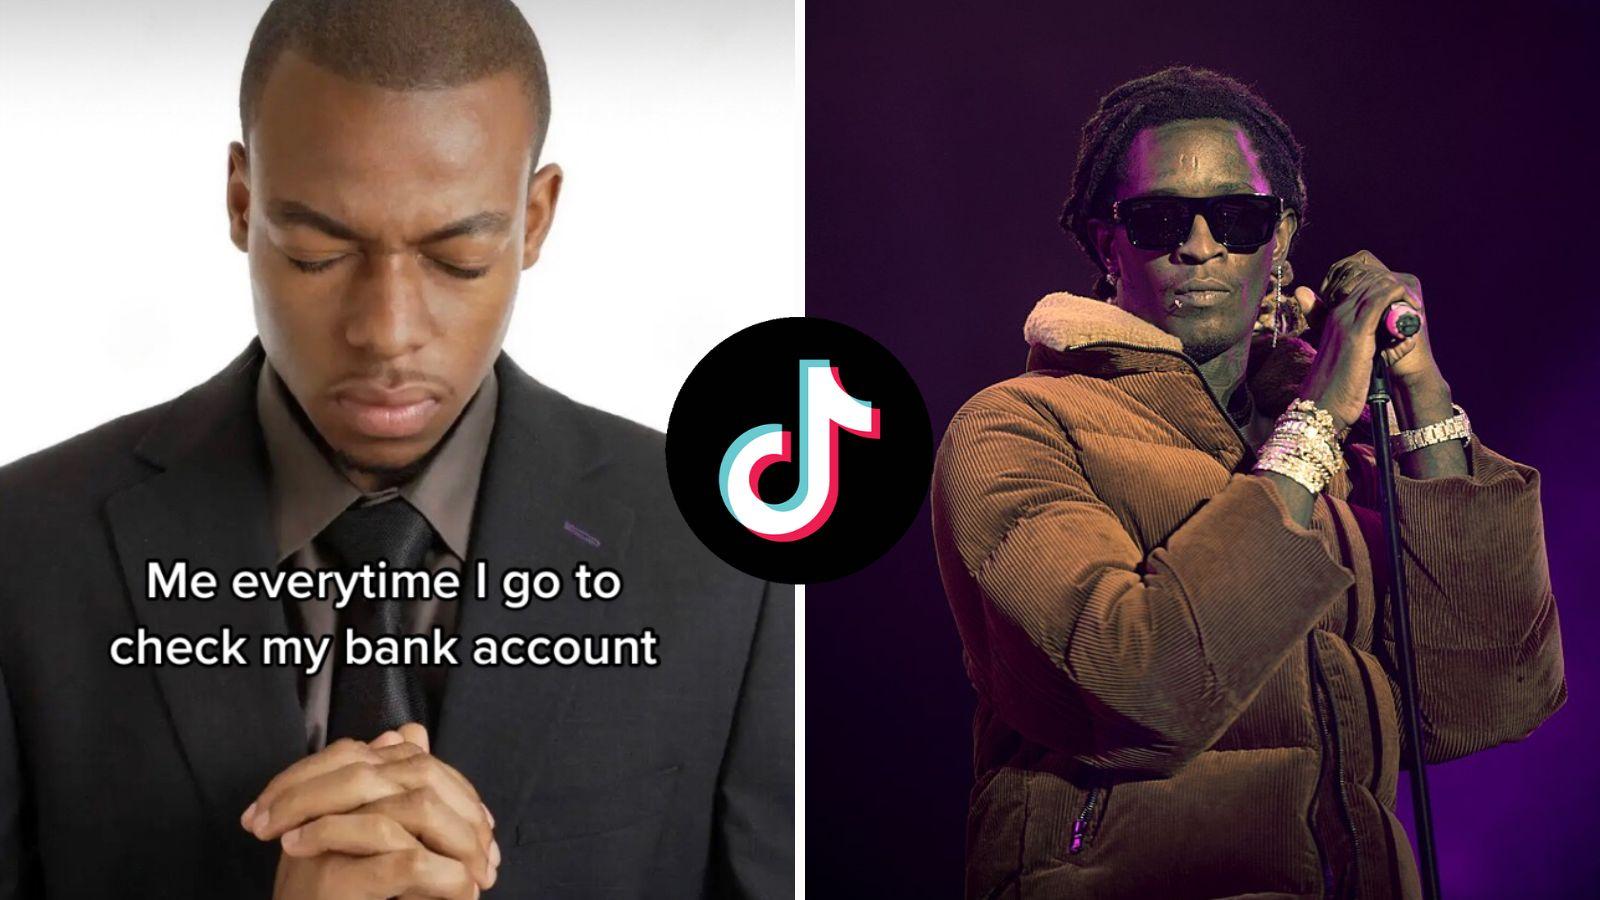 A meme of a man praying, and a photo of rapper Young Thug